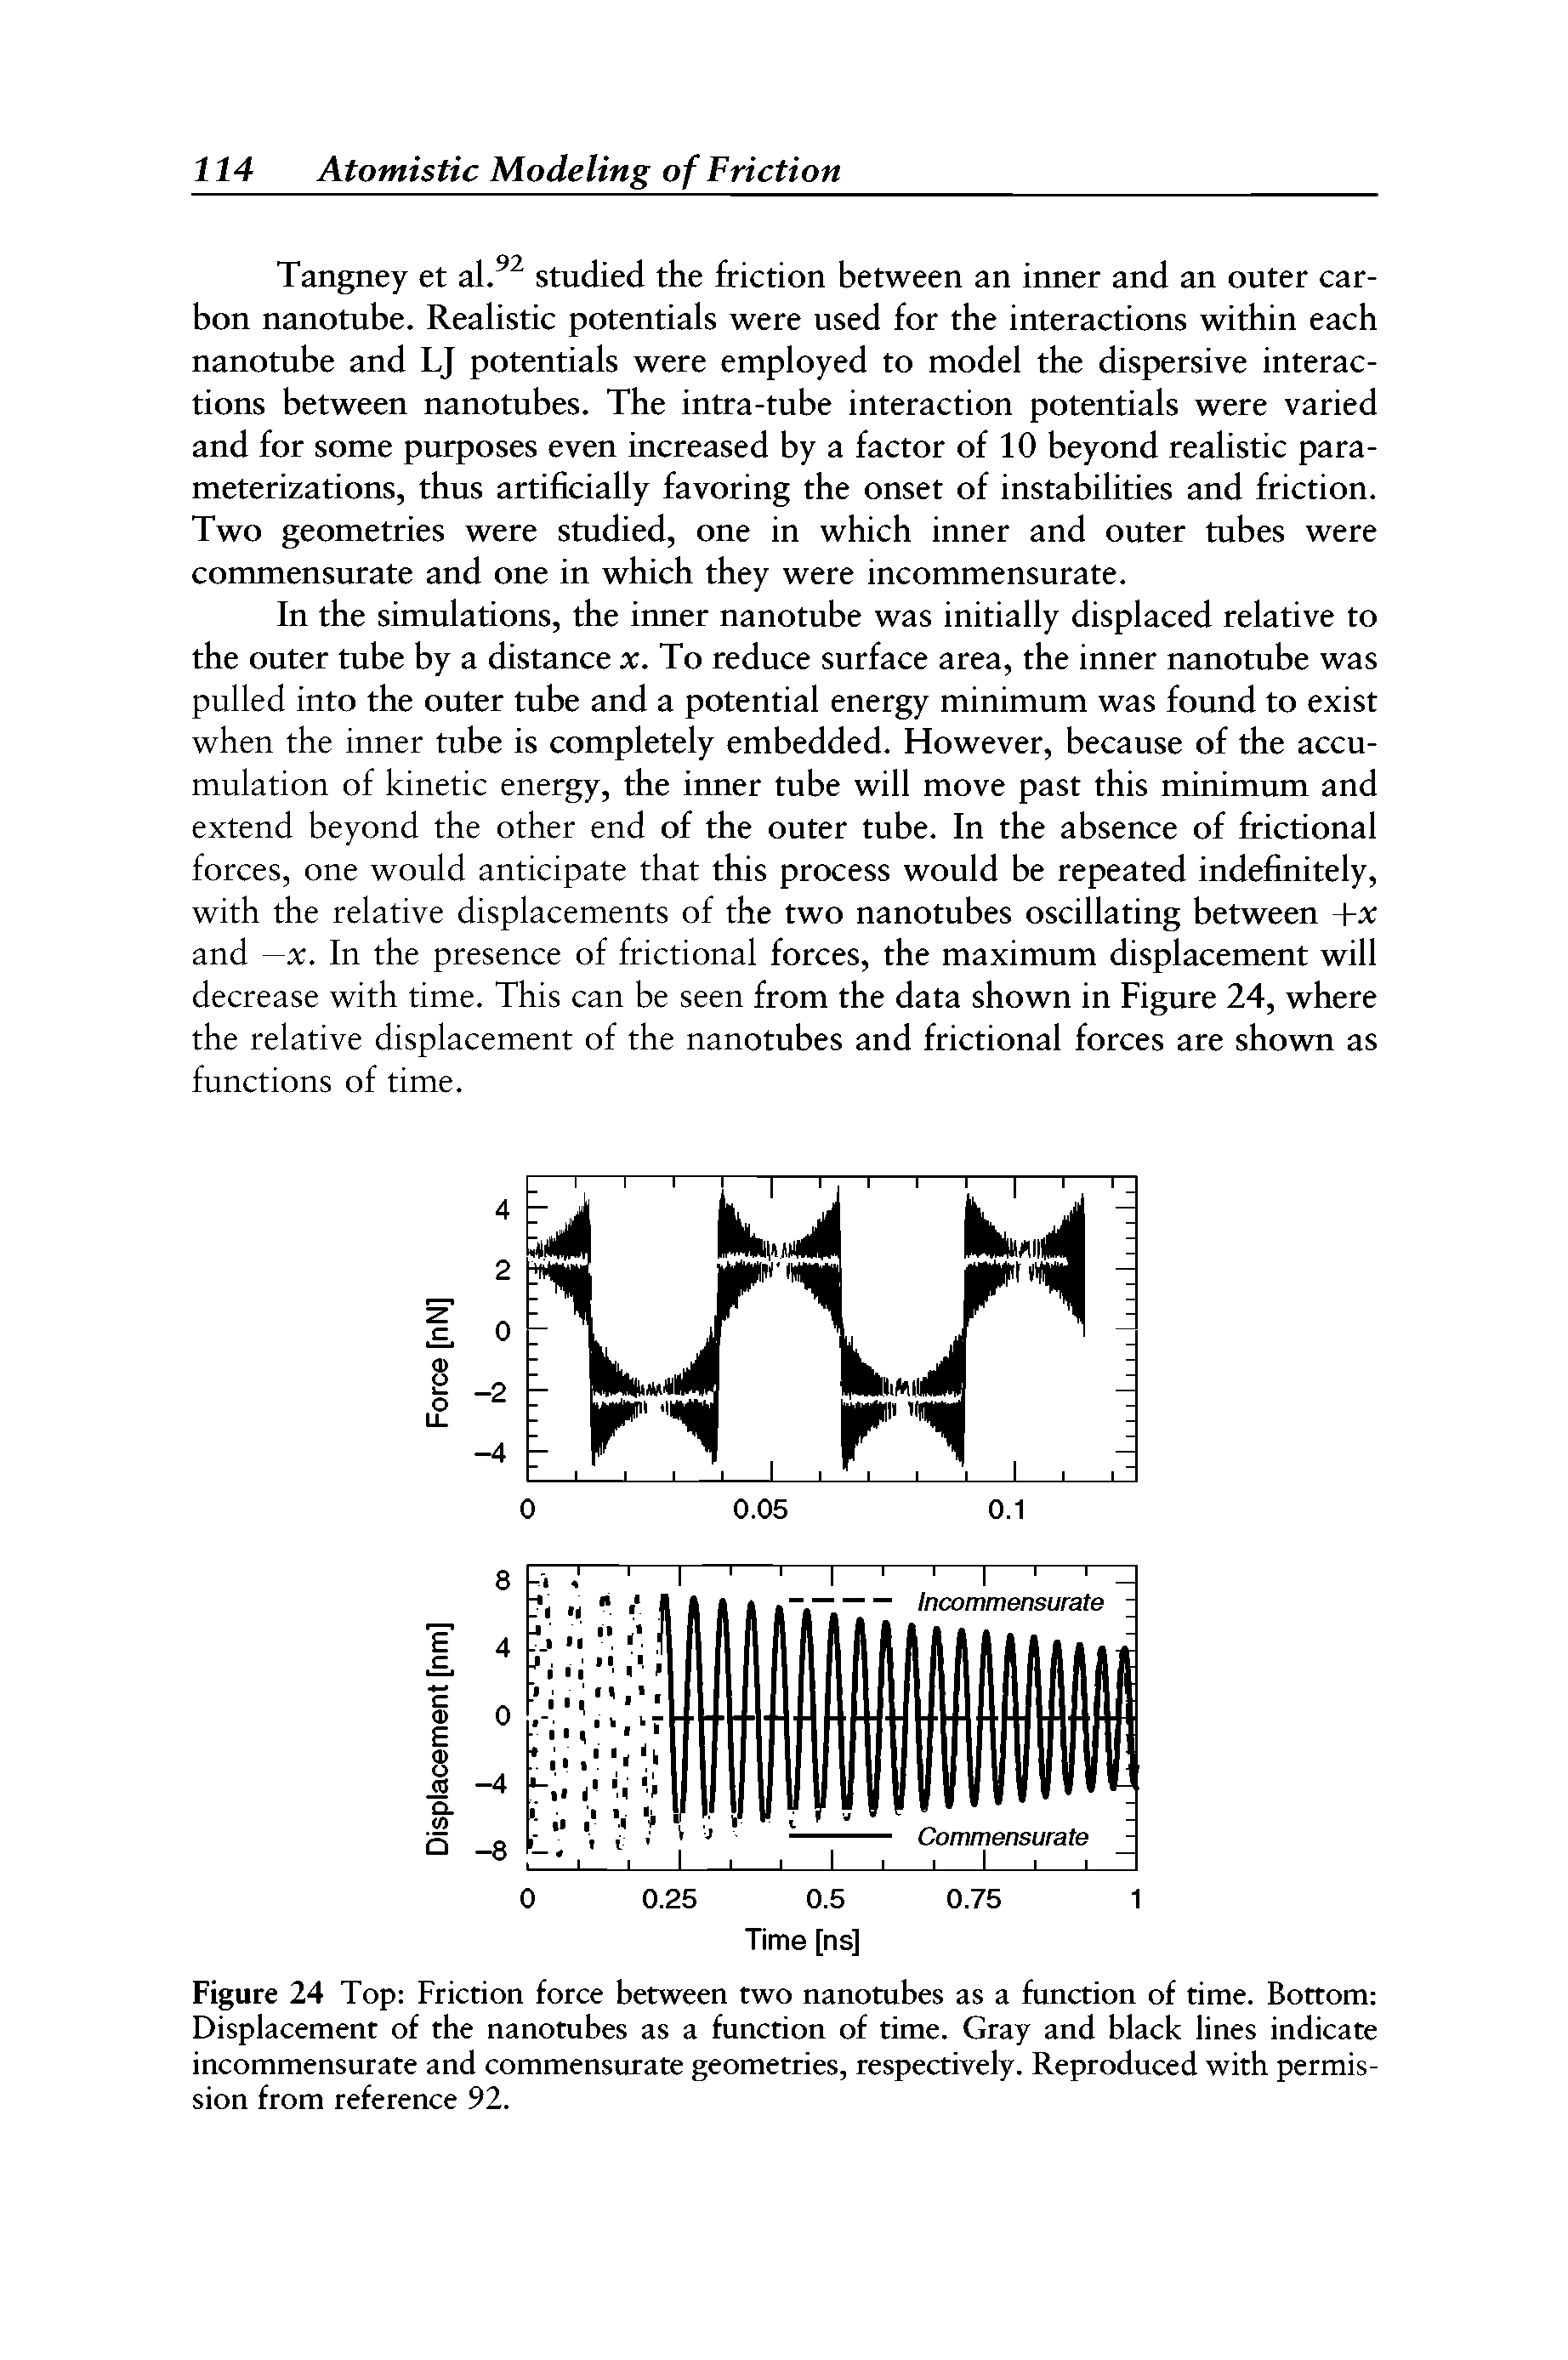 Figure 24 Top Friction force between two nanotubes as a function of time. Bottom Displacement of the nanotubes as a function of time. Gray and black lines indicate incommensurate and commensurate geometries, respectively. Reproduced with permission from reference 92.